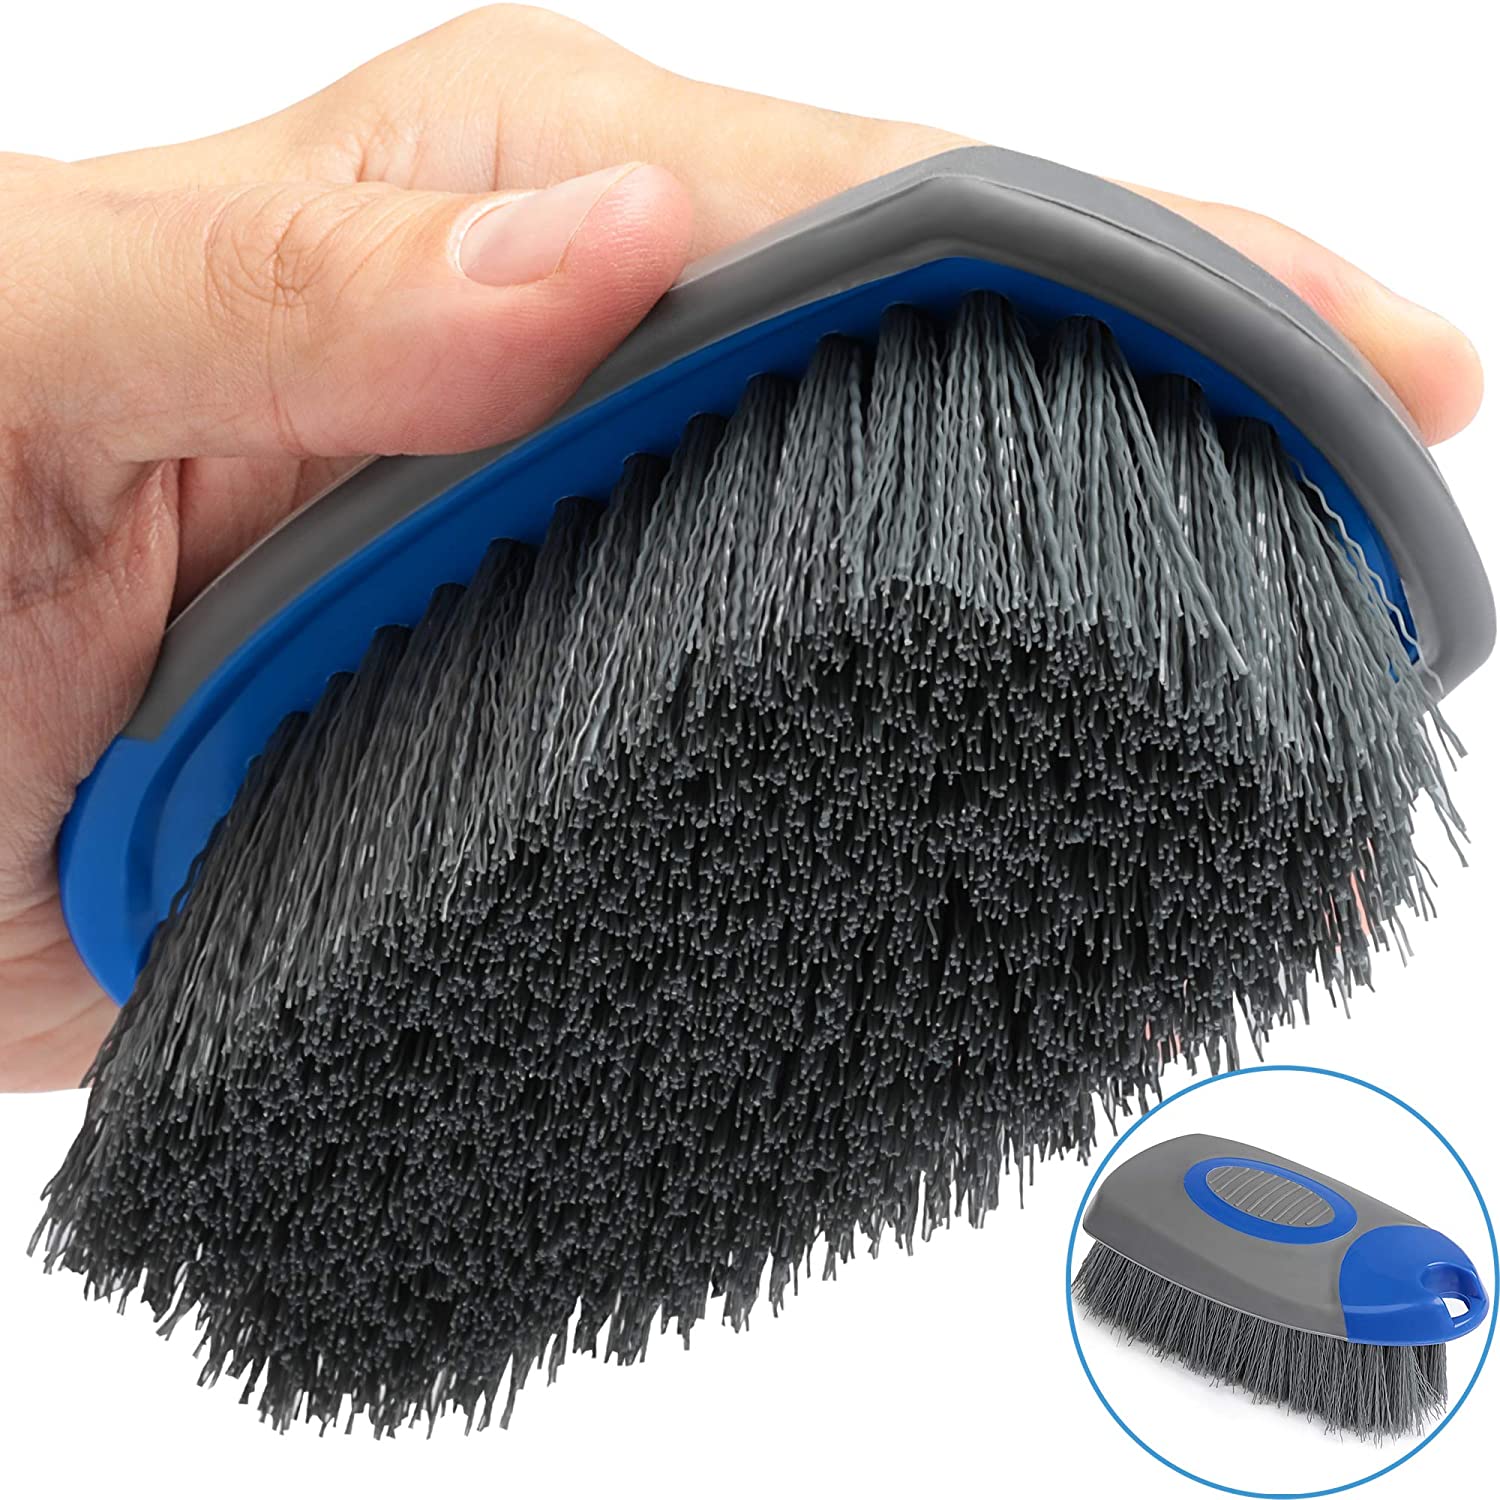 Relentless Drive The Ultimate Tire Brush